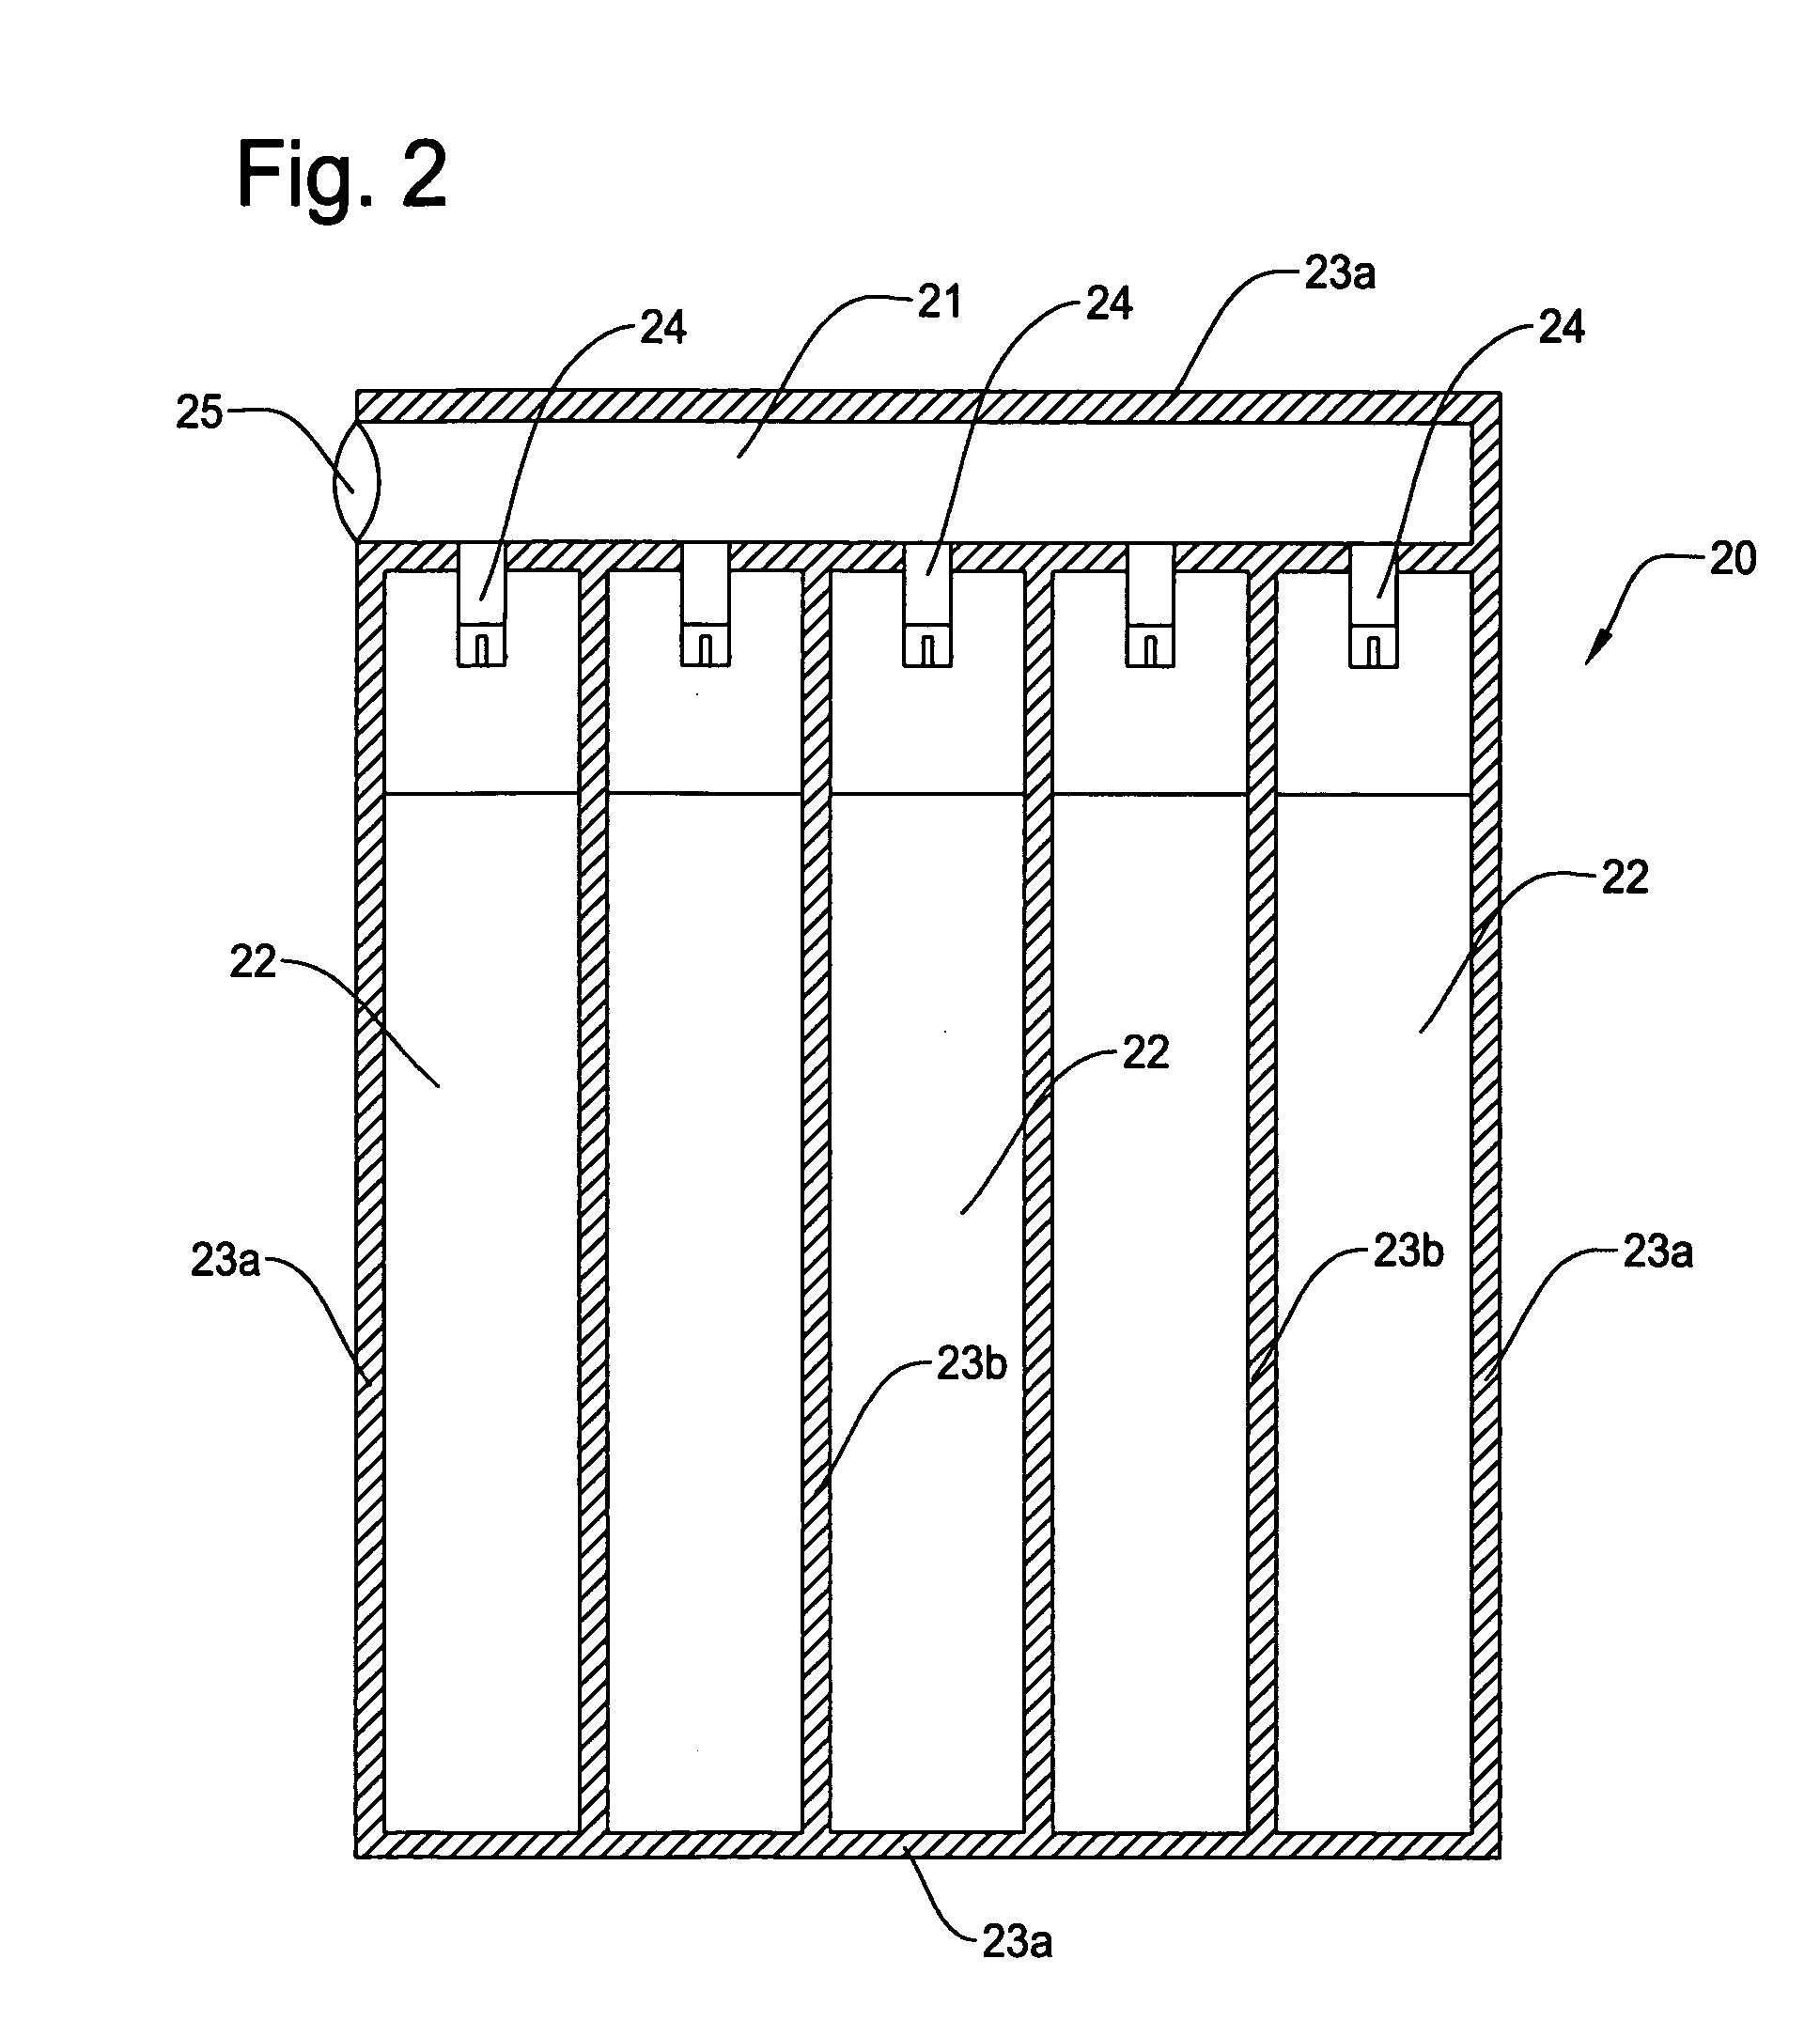 Structure of air-packing device